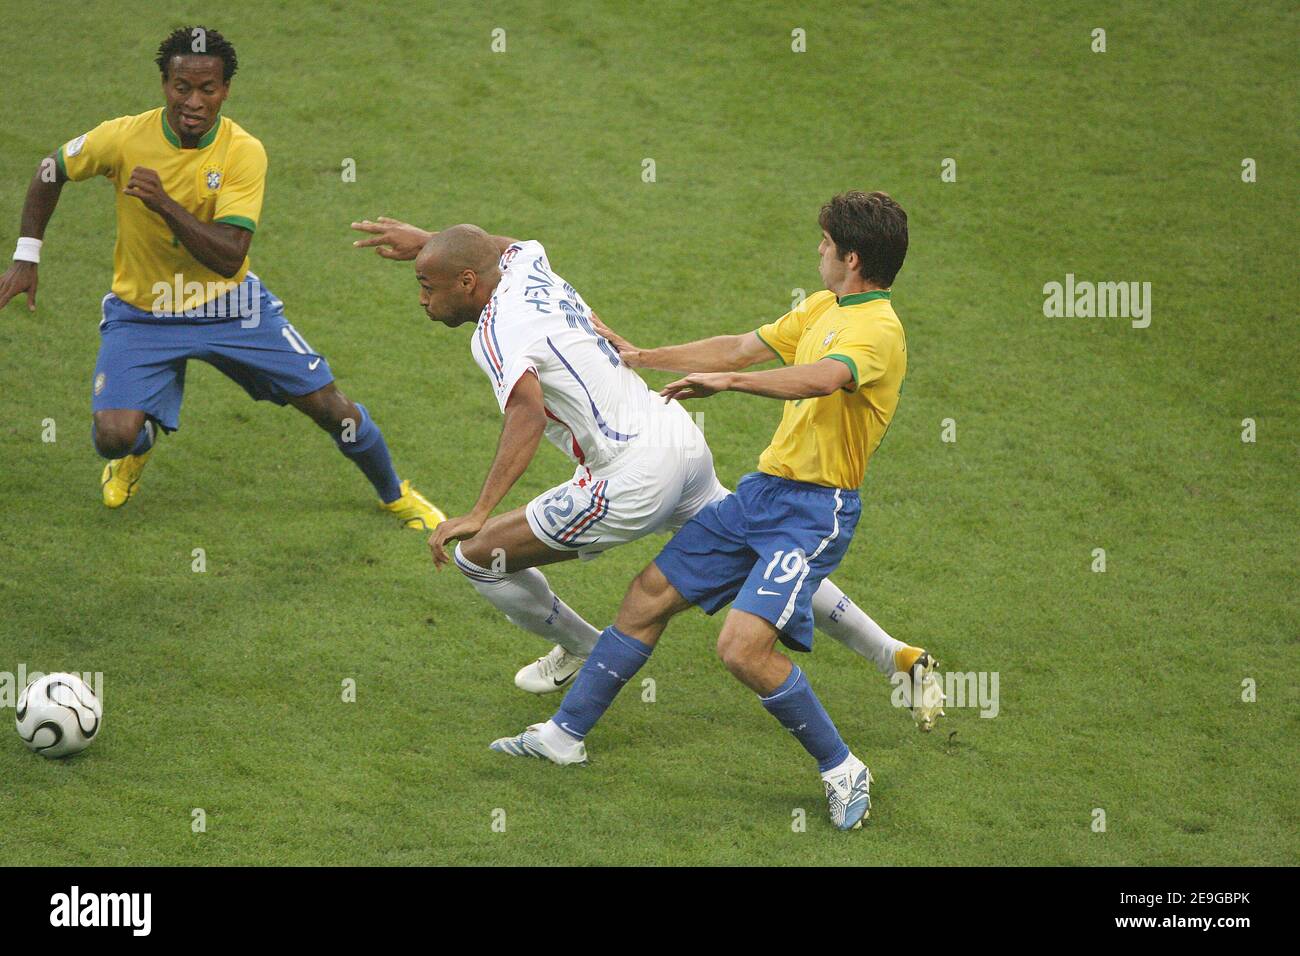 Brazil's Ze Roberto, France's Thierry Henry and Brazil's Juninho Pernambucano battle for the battle during the World Cup 2006, quater-final, Brazil vs France at the Commerzbank-Arena stadium in Frankfurt, Germany on July 1, 2006. France won 1-0 and advances to World Cup semifinals. Photo by Gouhier-Hahn-Orban/Cameleon/ABACAPRESS.COM Stock Photo